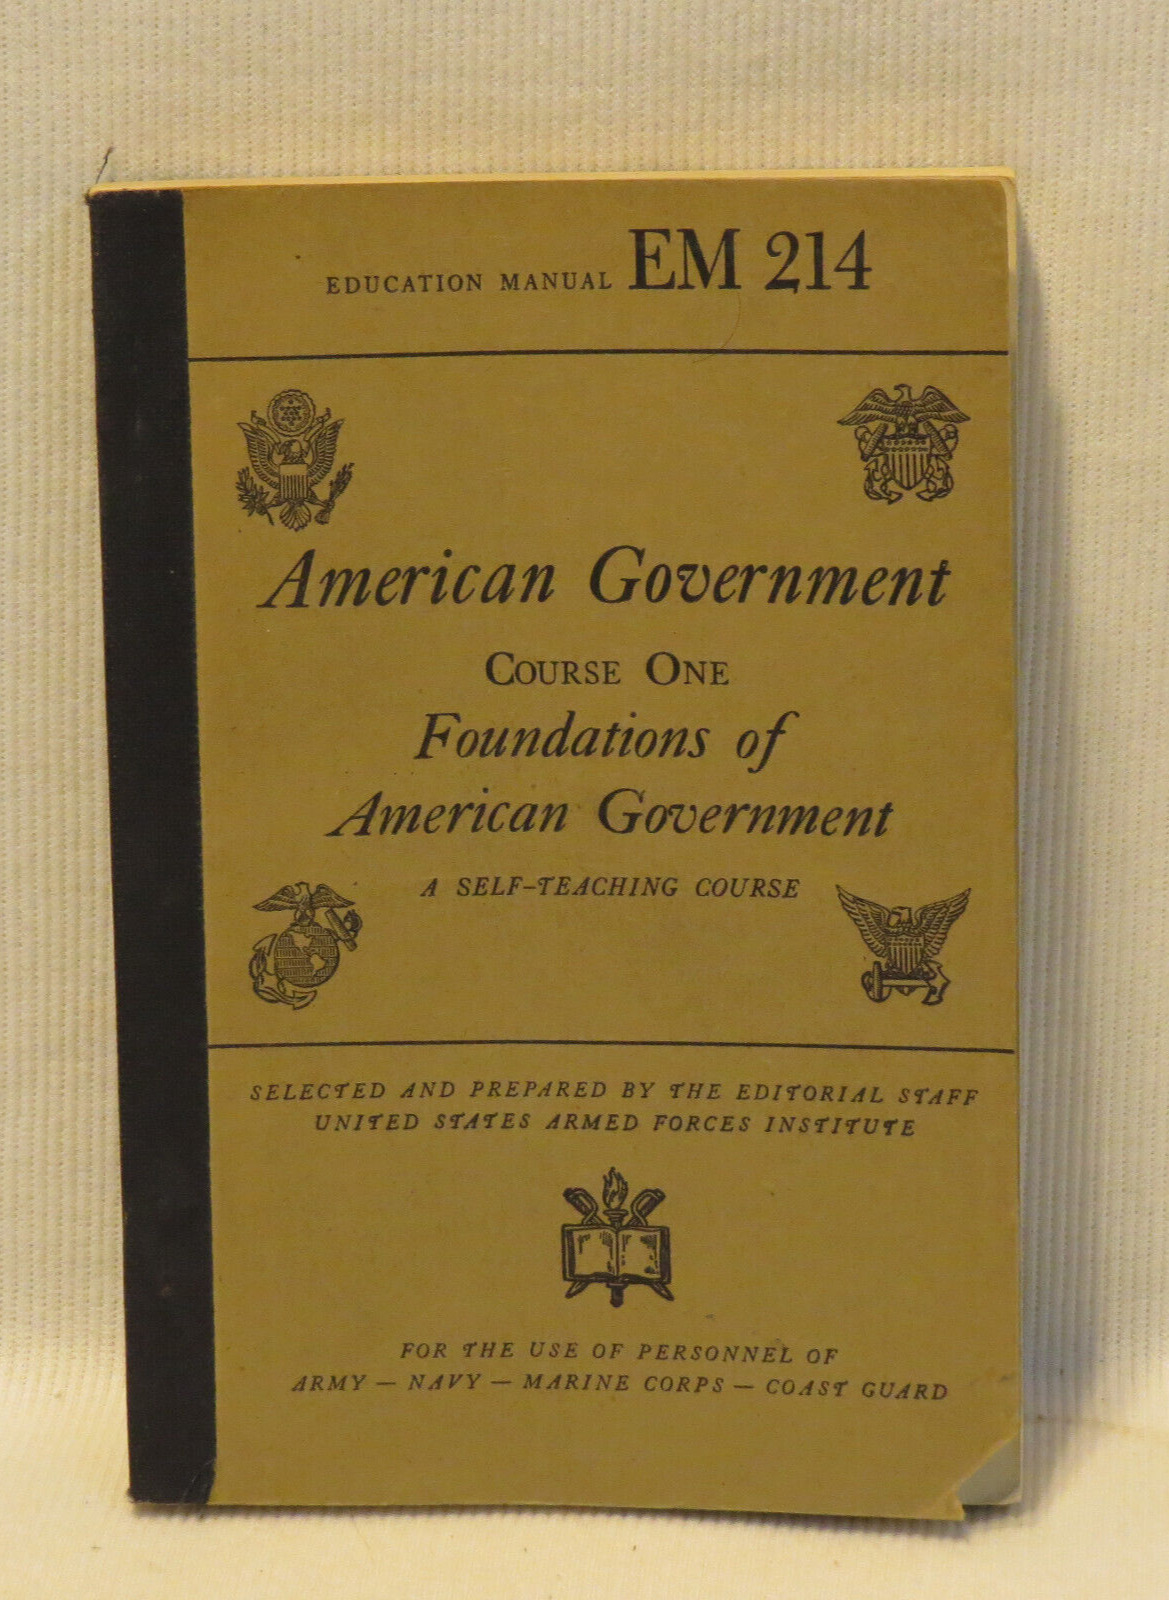 SCARCE American Government Course One Manual, Foundations, 1944, US Armed Forces